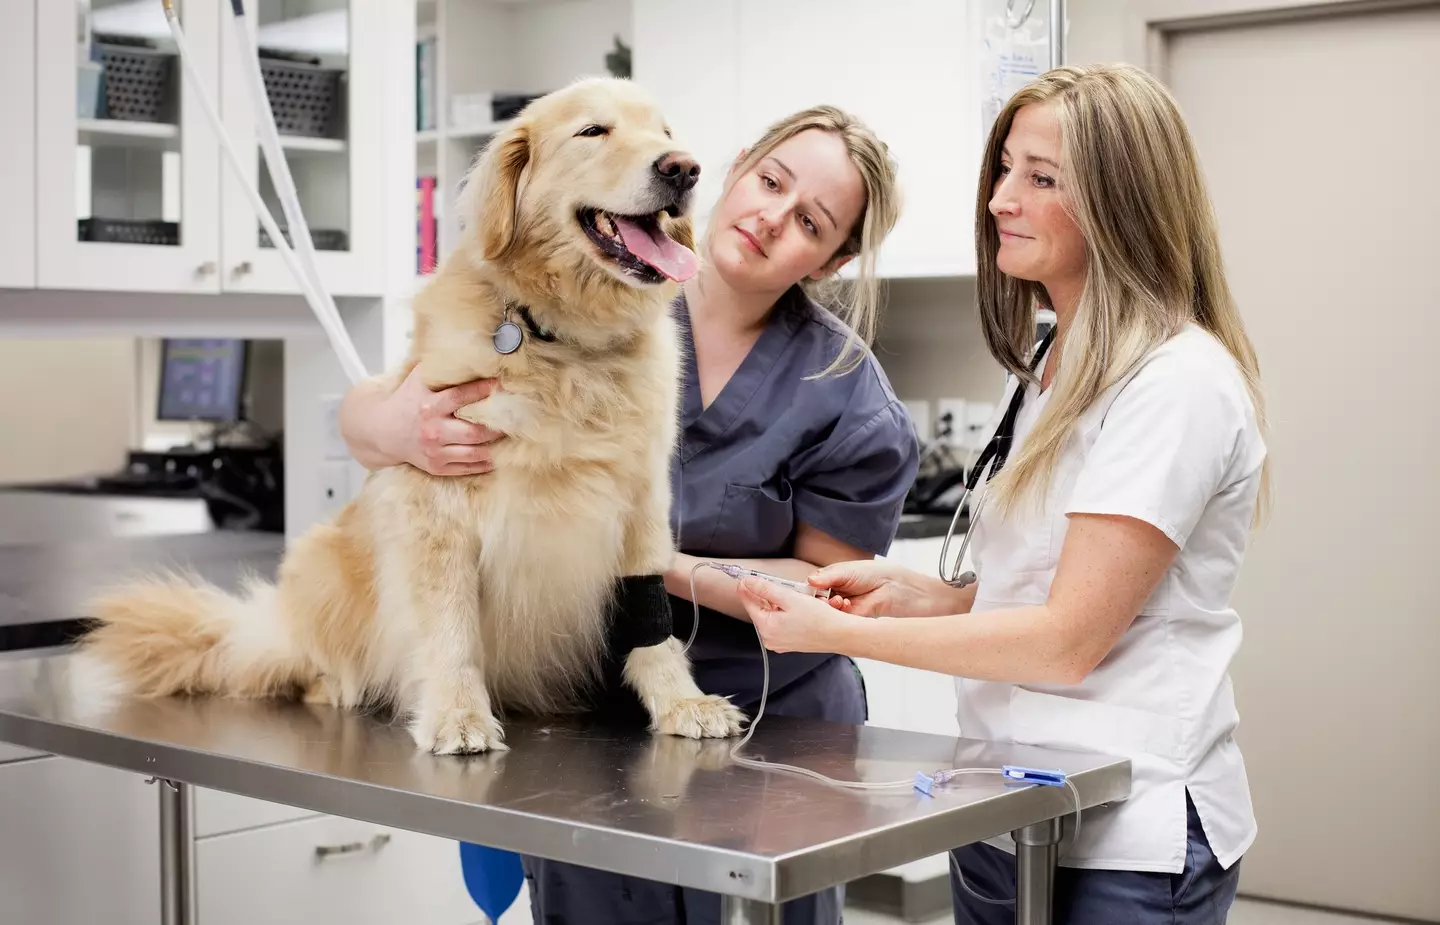 The animal doctors explained dogs search for their owners when left alone.